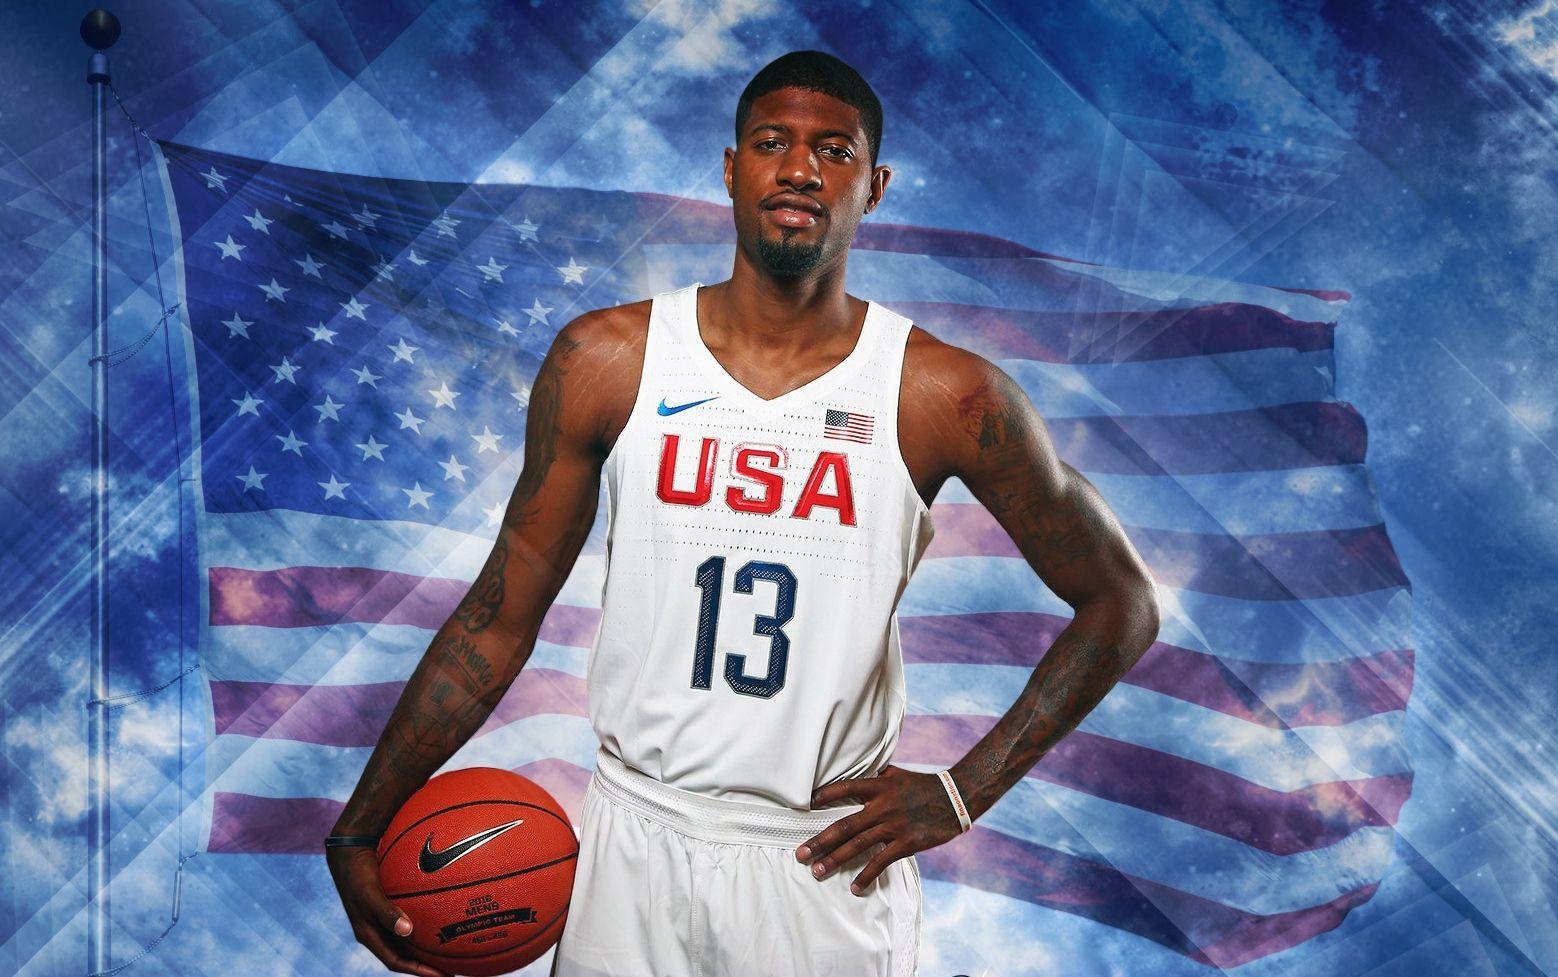 Paul George wins Gold with Team USA in Rio State Athletics